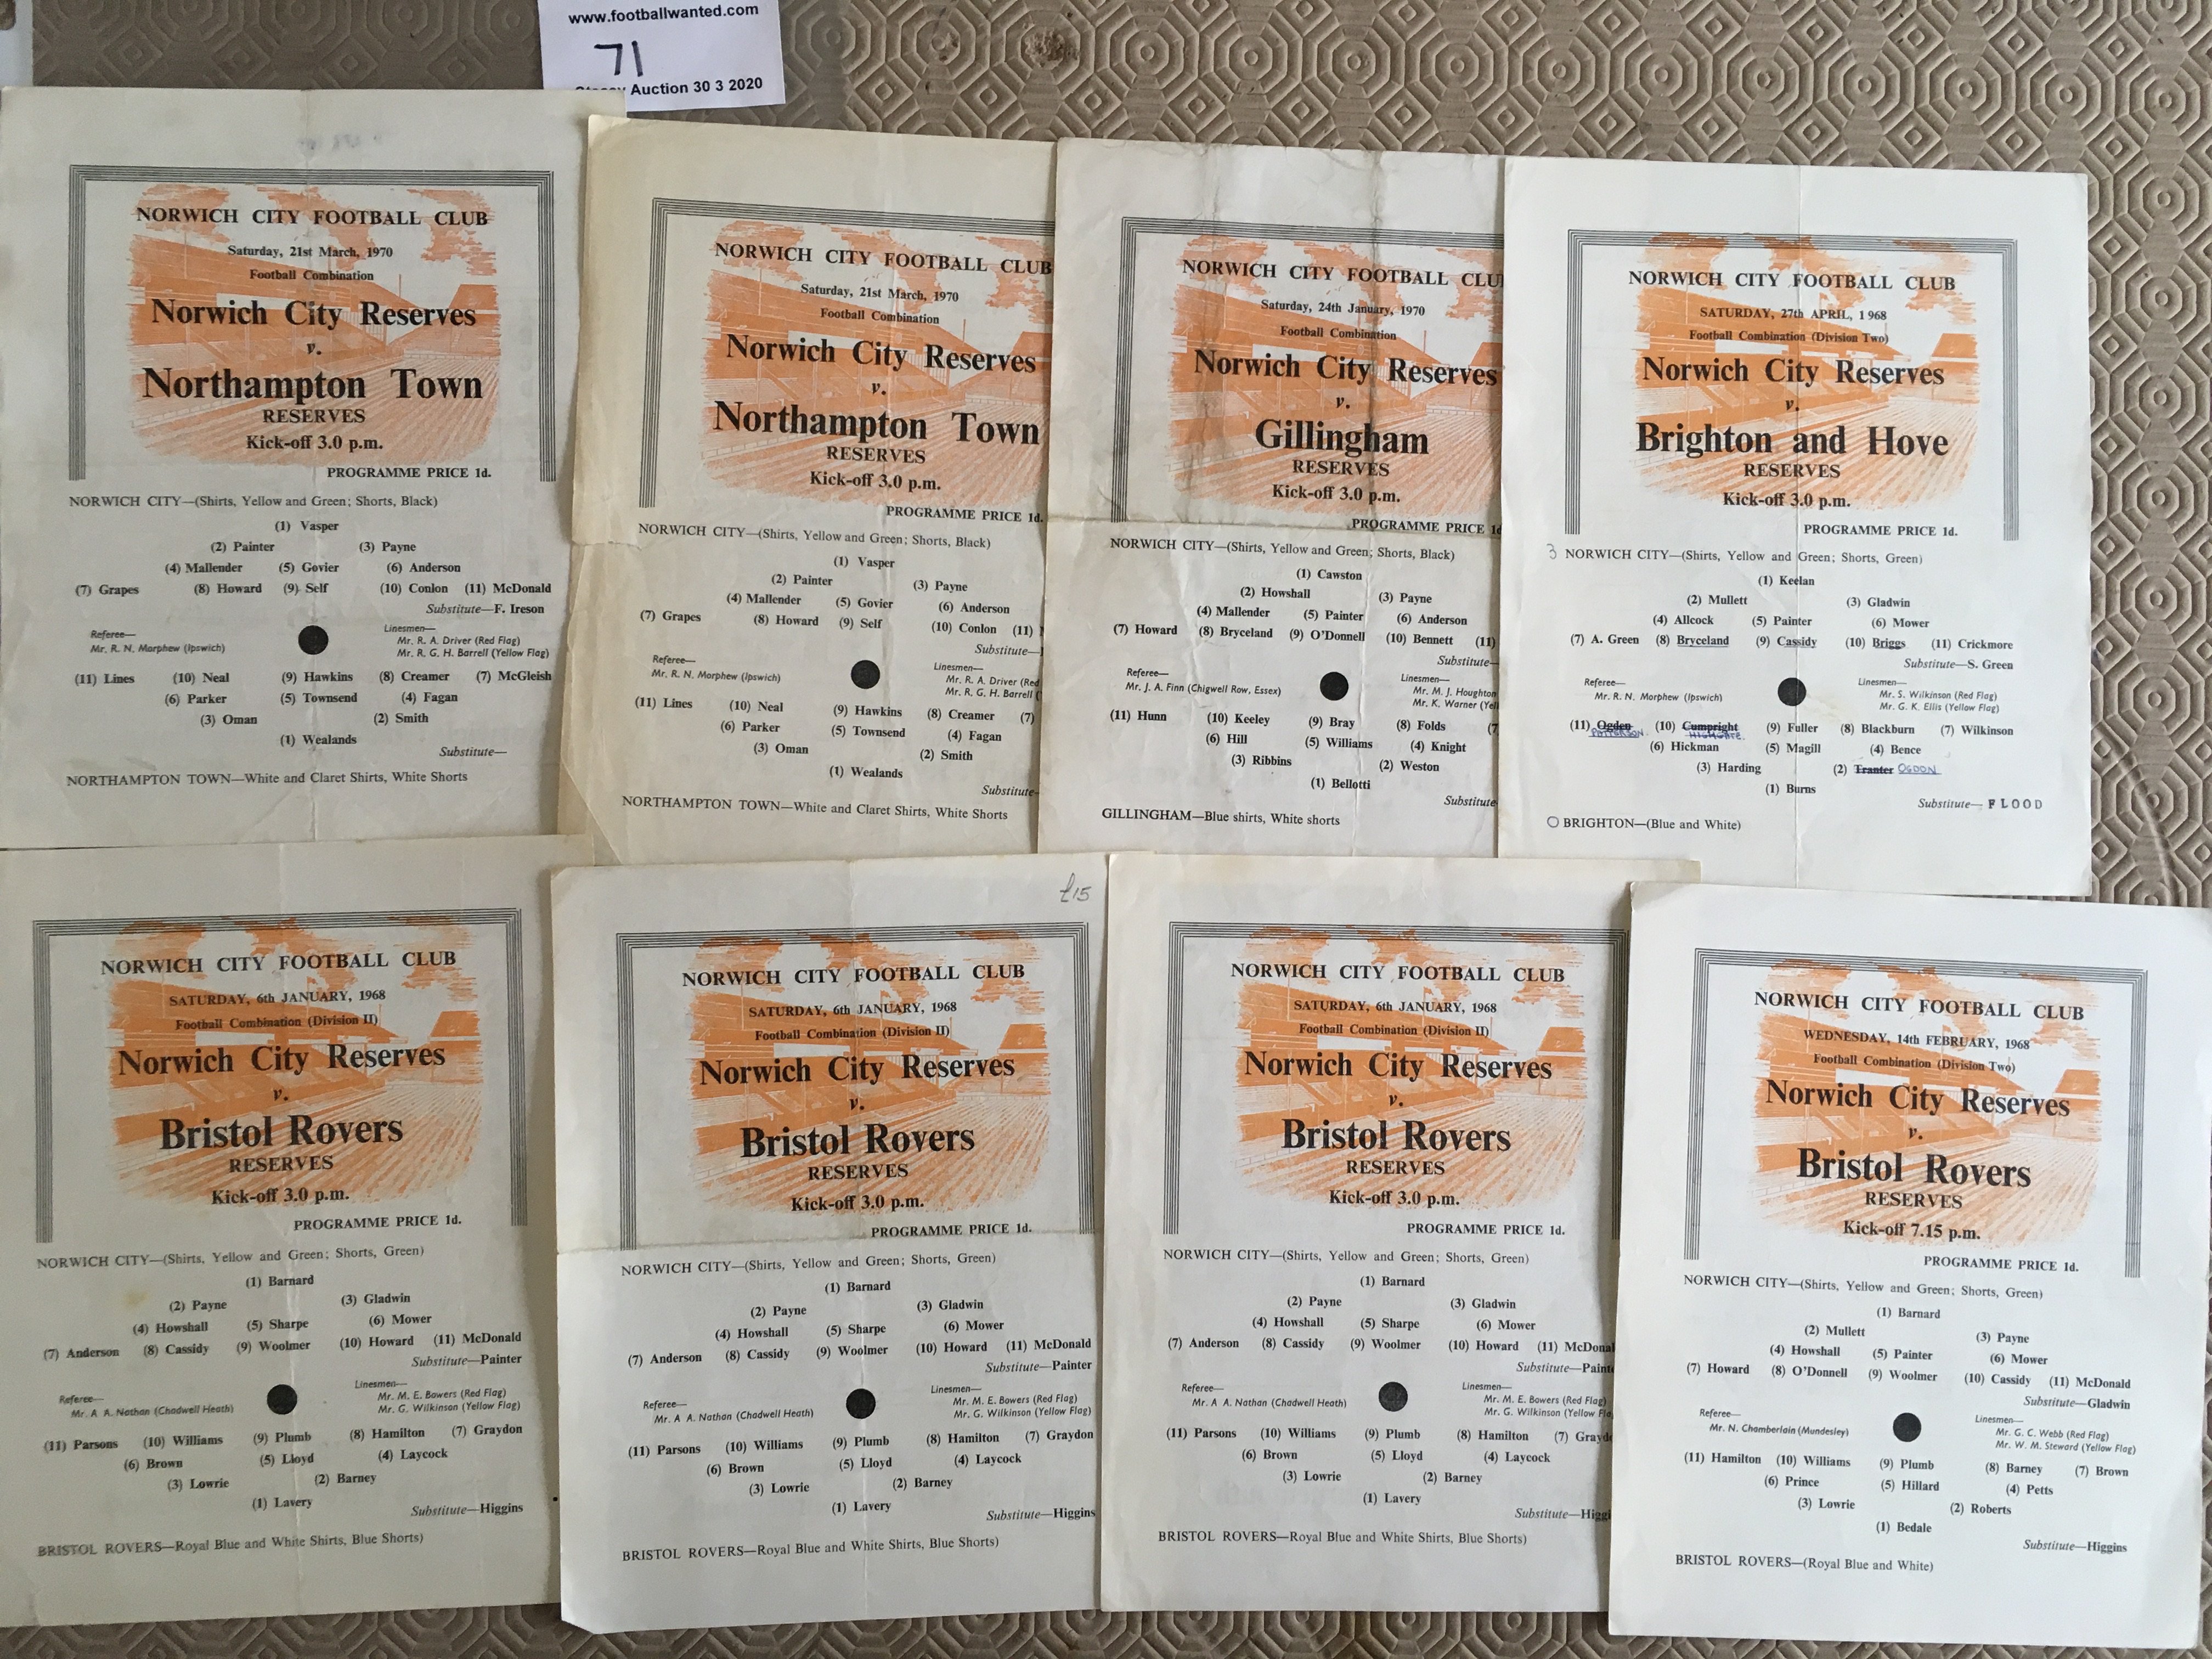 Norwich City Late 1960s Reserve Football Programmes: Single sheets 67/68 to 69/70. Overall fair/good